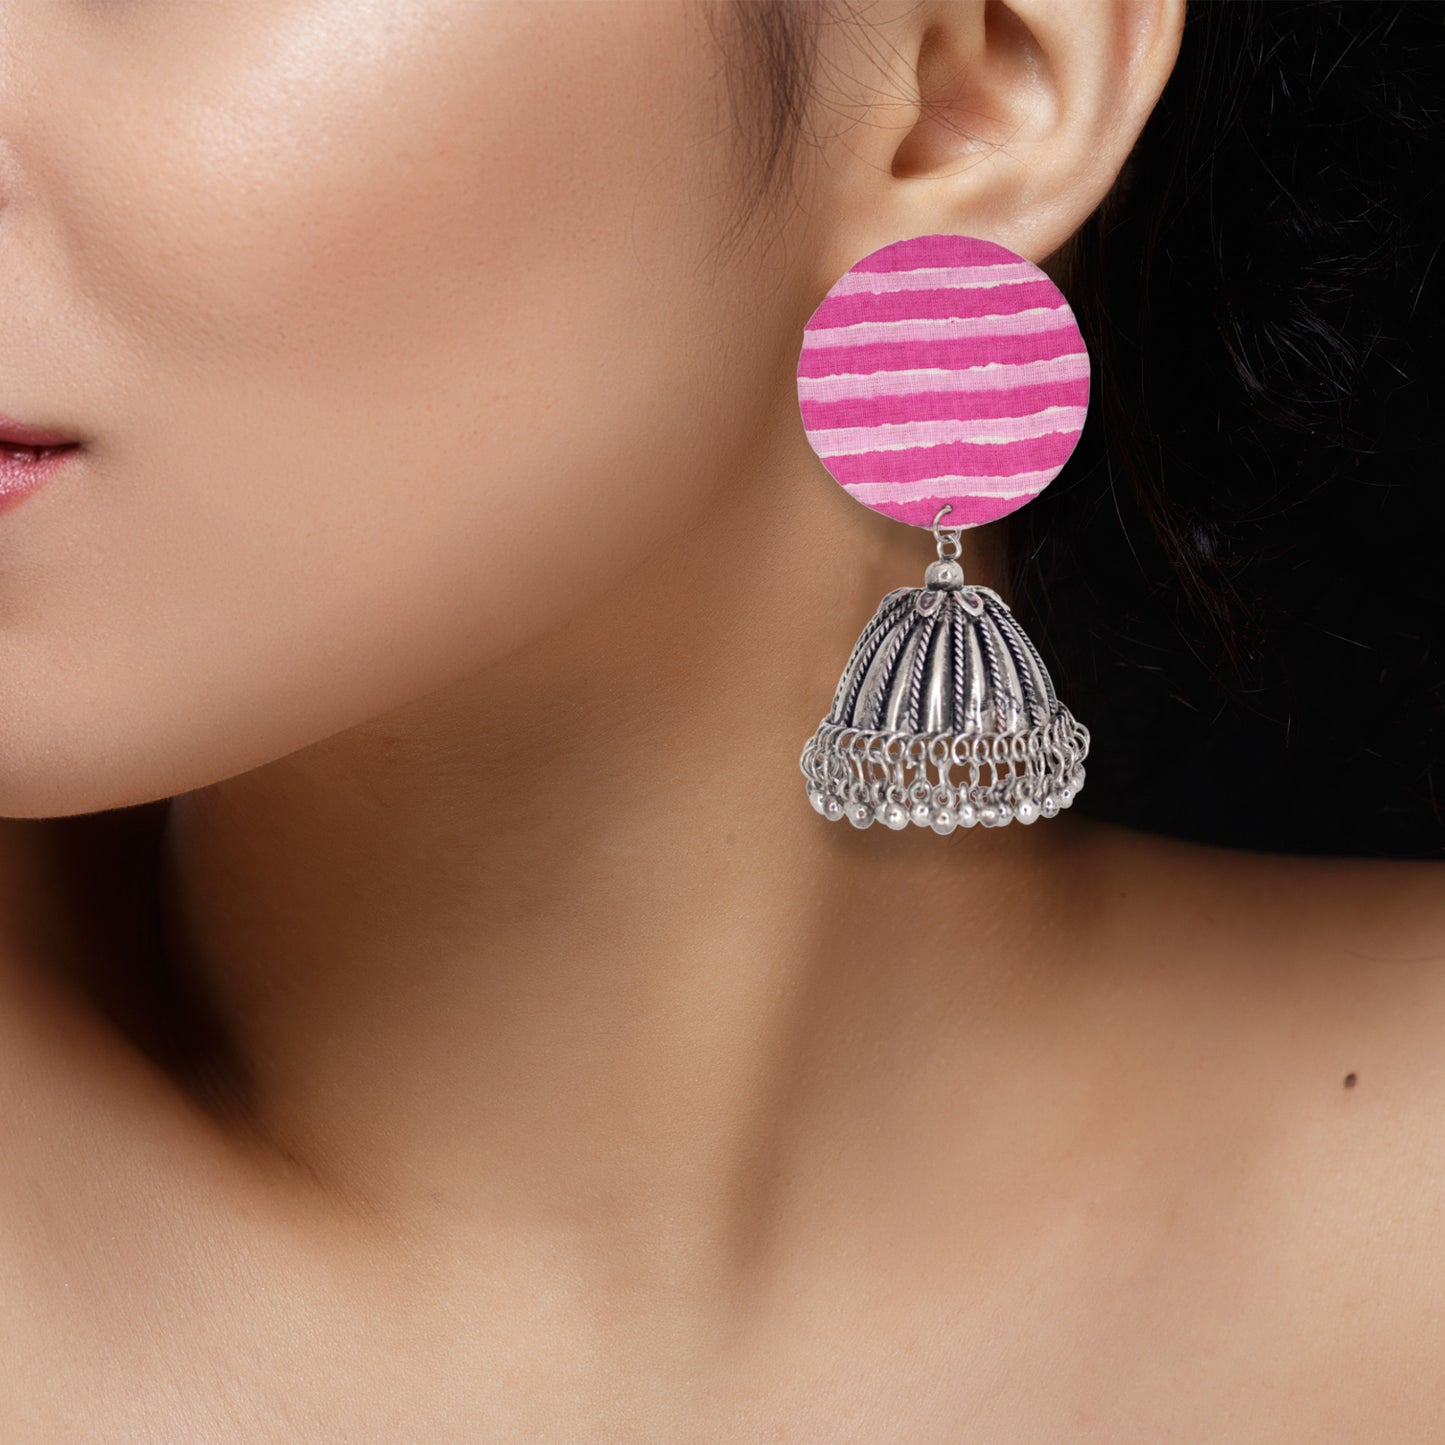 Organic Vibes Handmade Unique Pink and White Striped Round Stud with Silver Jhumka Fabric Earrings For Women